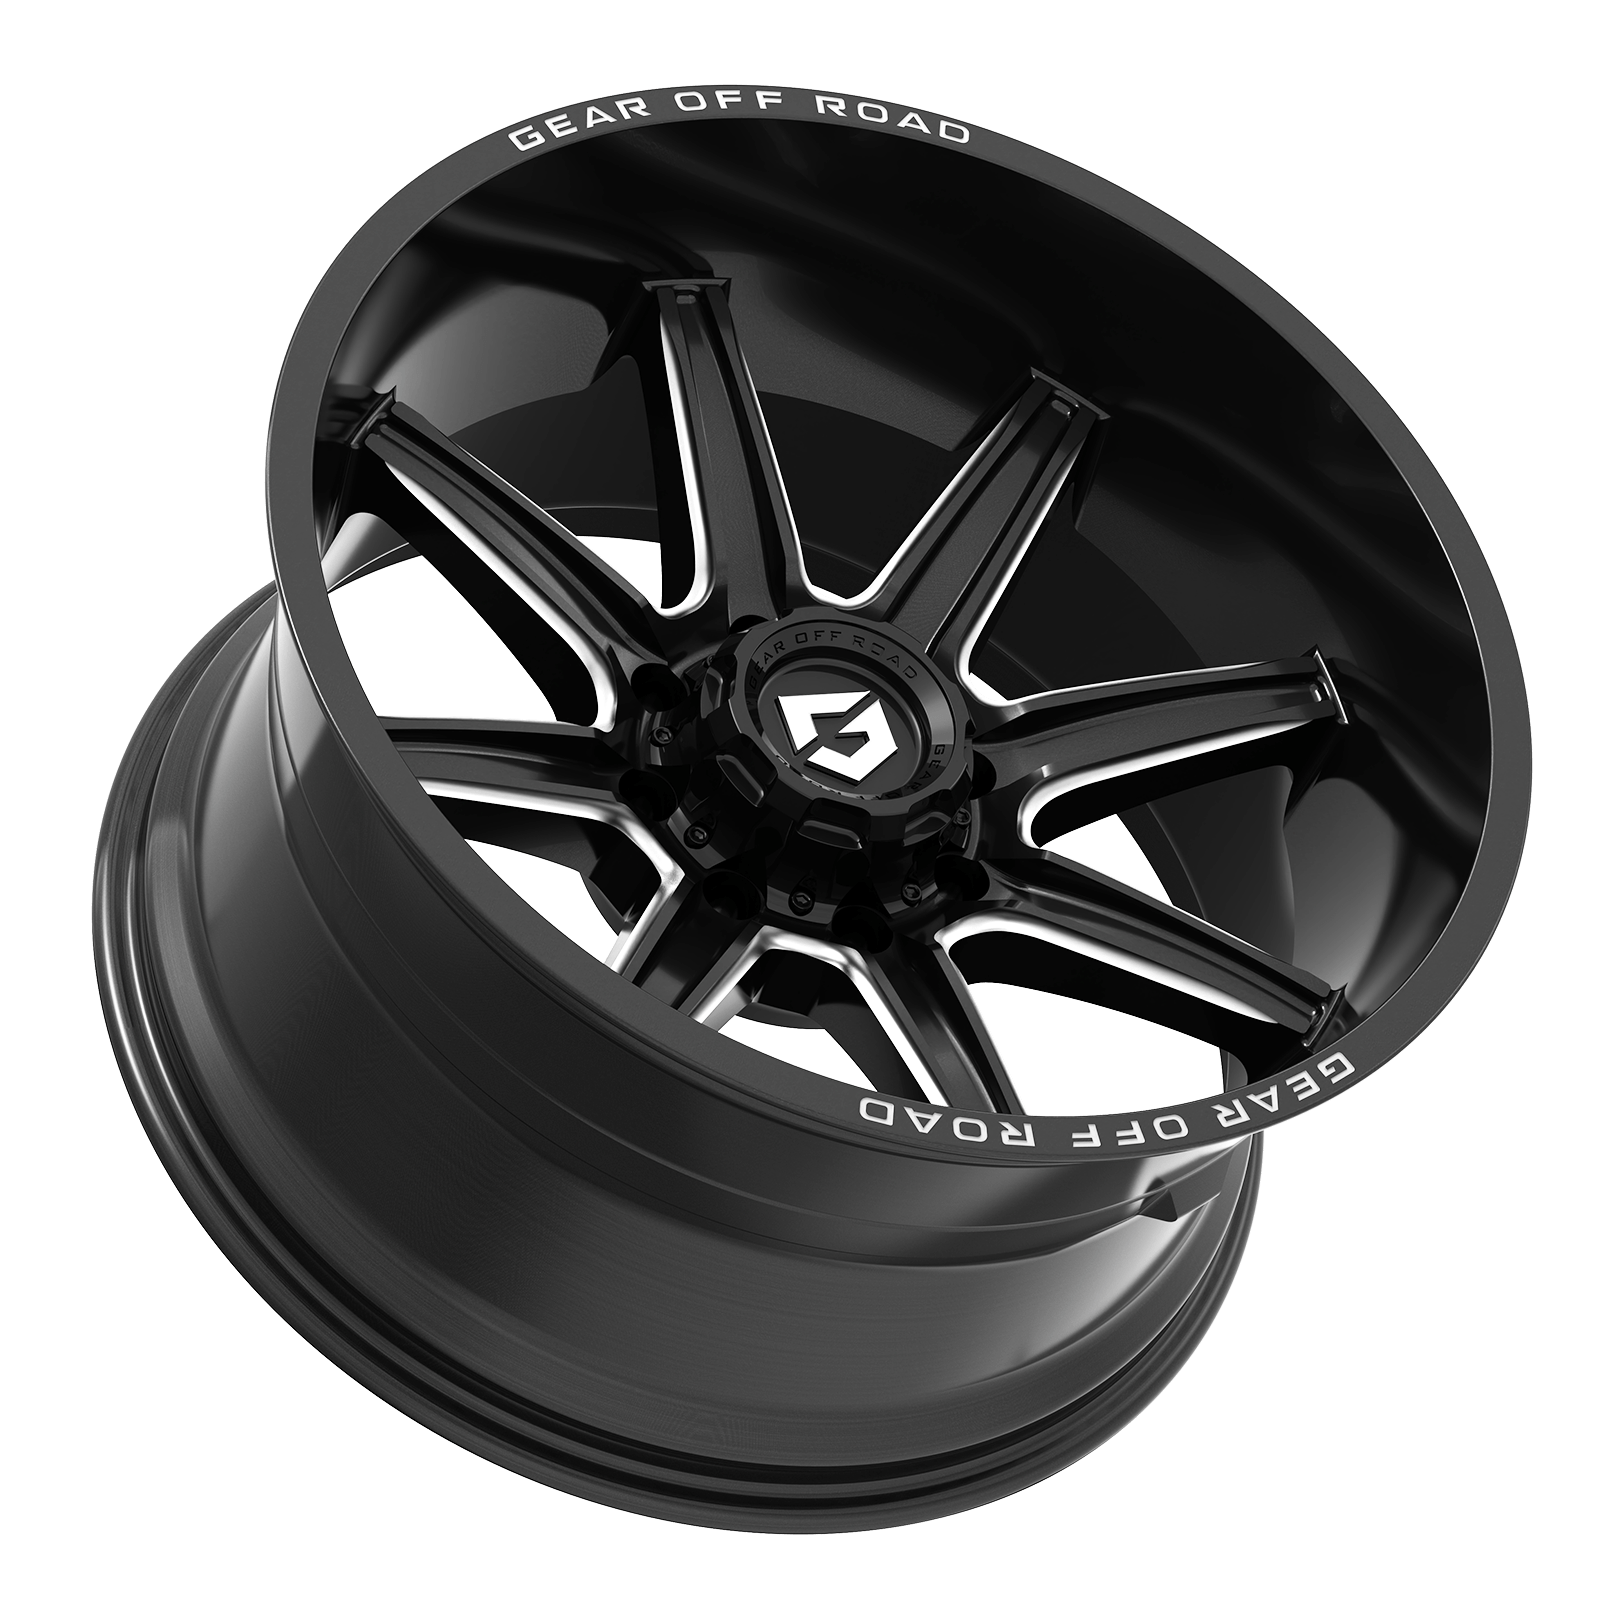 Gear Off Road 765BM 765BM-8906818 18X9 6X135 / 6X5.50 (+18) G/A 765BM (HB 106.2) Gloss Black with Milled Accents & Lip Logo A260819 - image 3 of 3